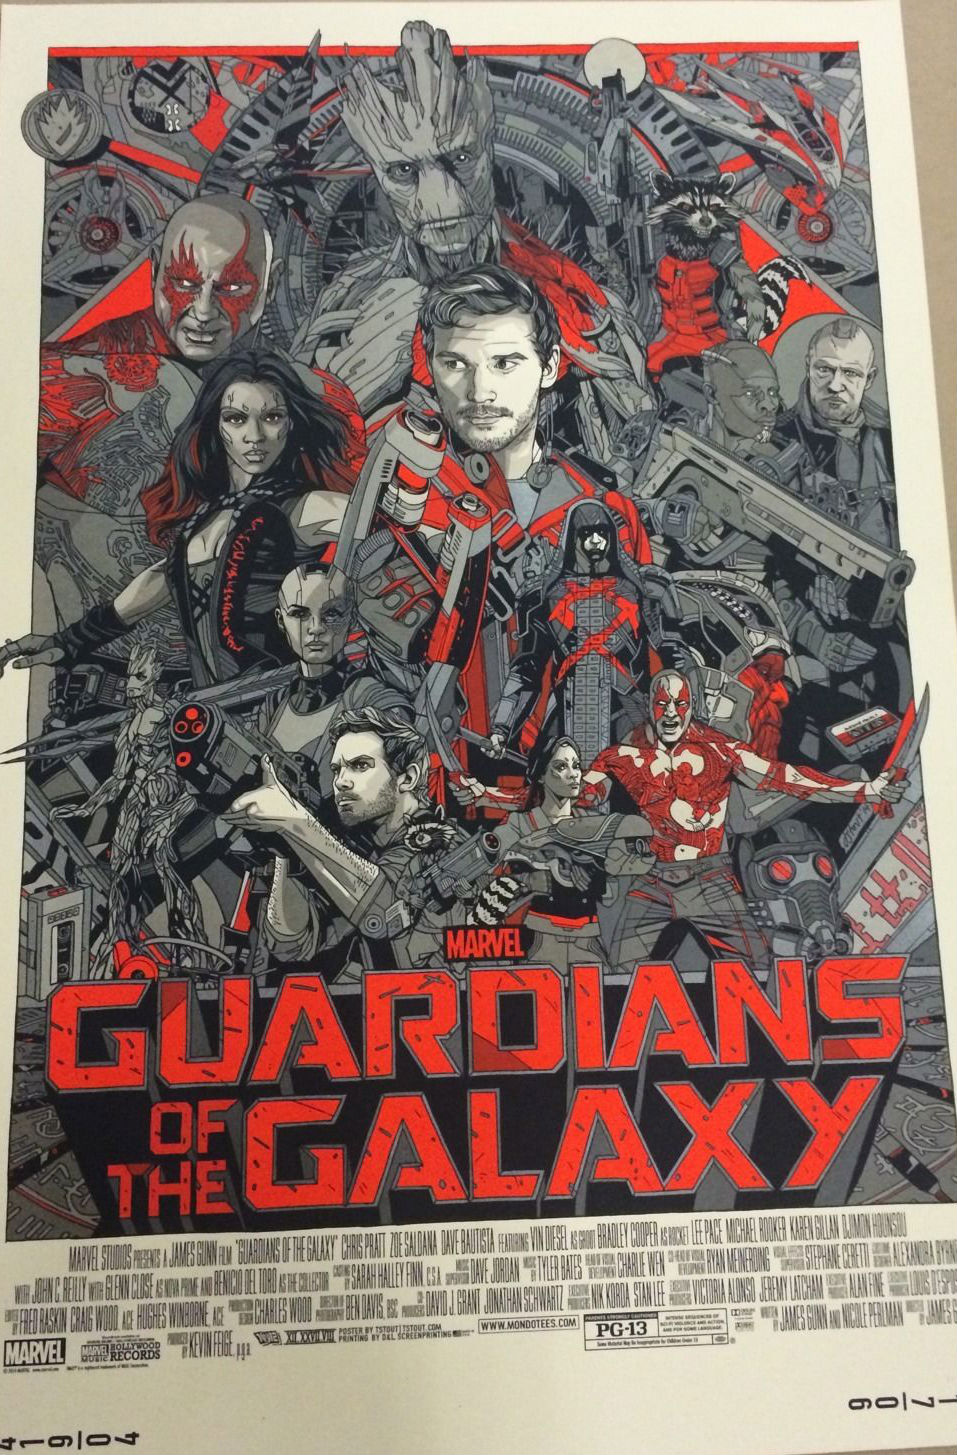 Tyler-Stout-Guardians-of-the-Galaxy-variant-pic.jpg